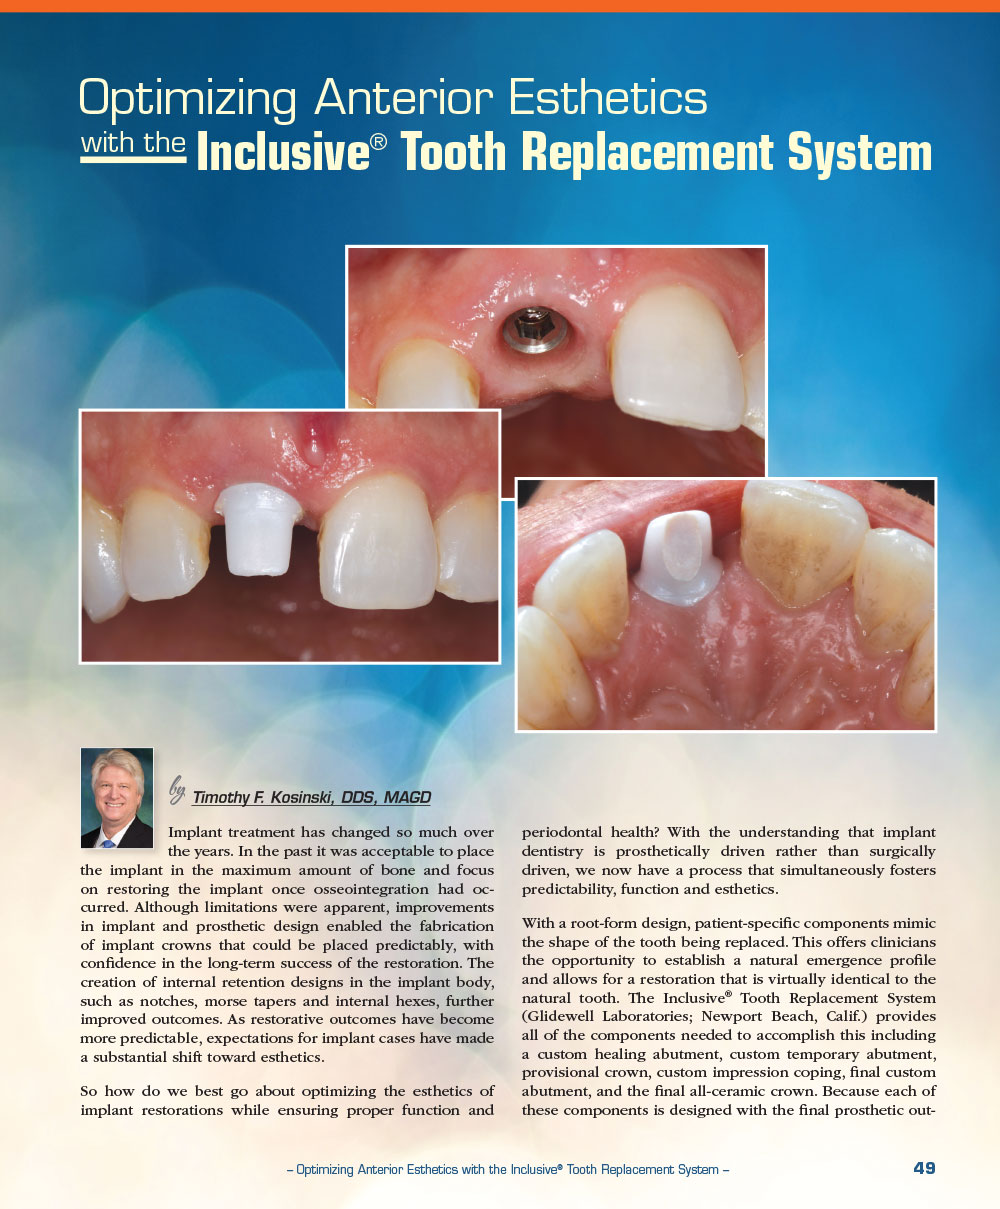 Optimizing Anterior Esthetics with the Inclusive® Tooth Replacement System